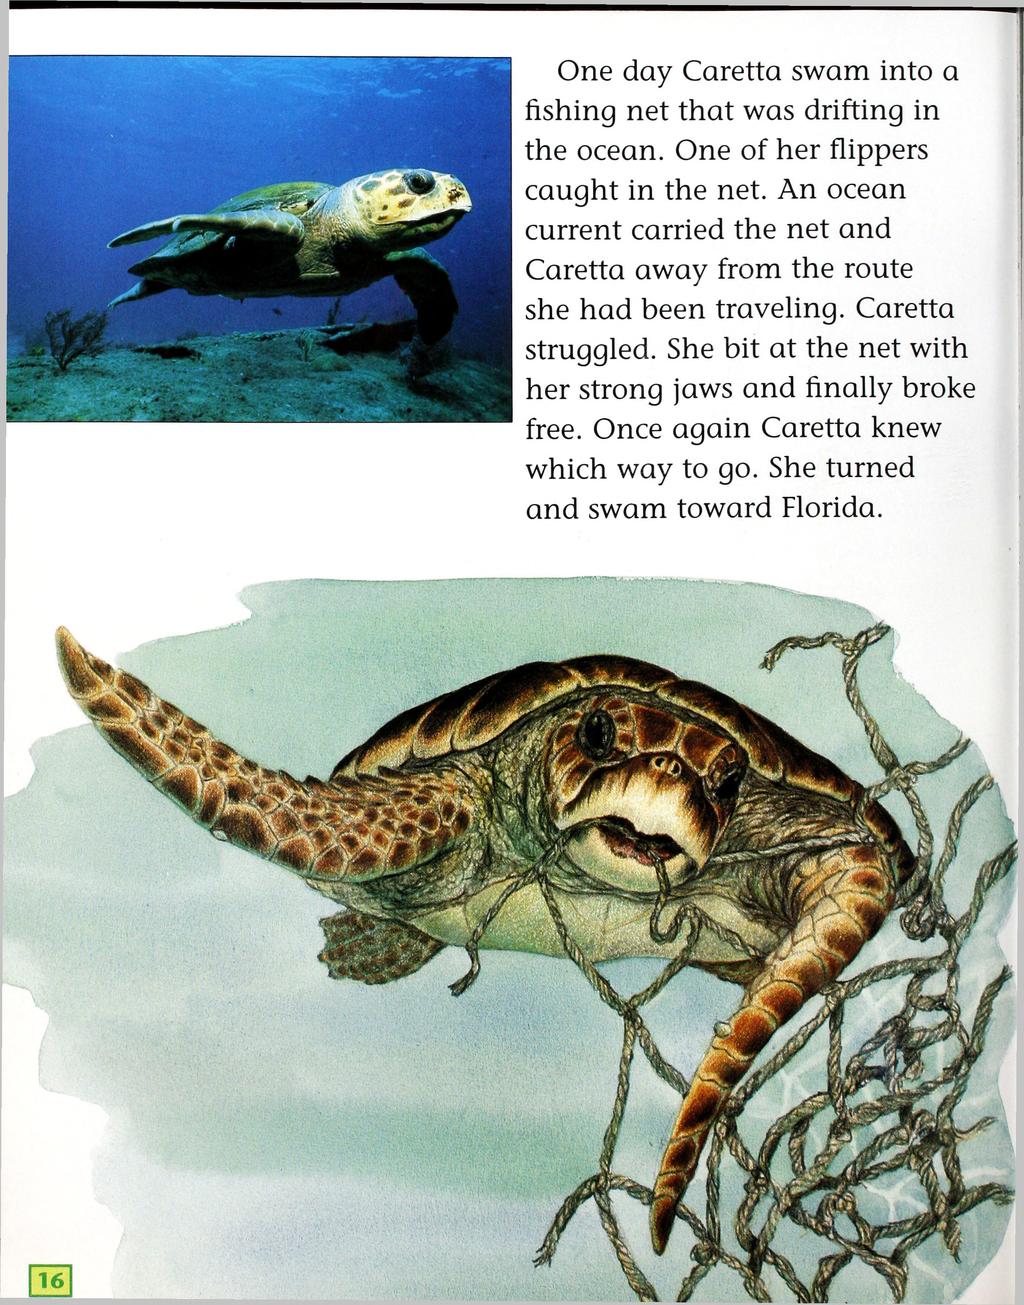 One day Caretta swam into a fishing net that was drifting in the ocean. One of her flippers caught in the net.